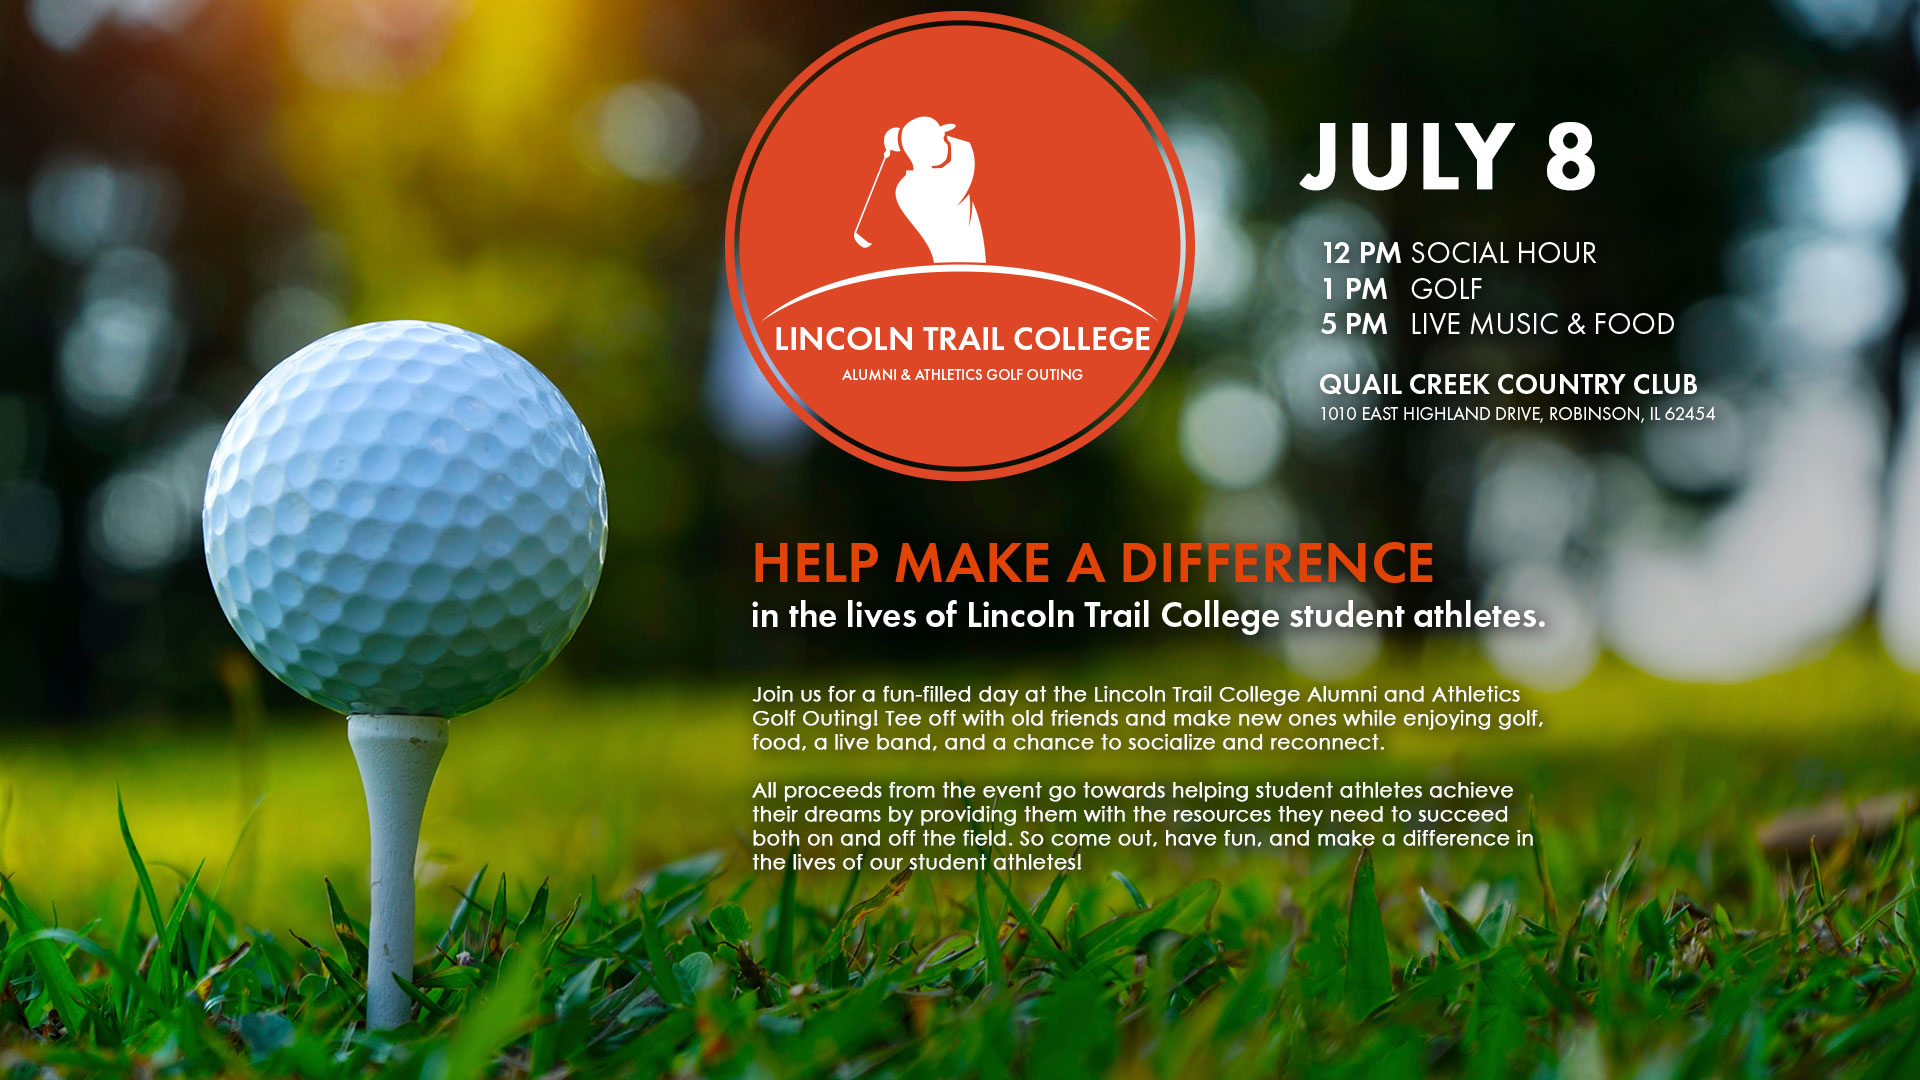 LTC Alumni and Athletics Golf Outing July 8